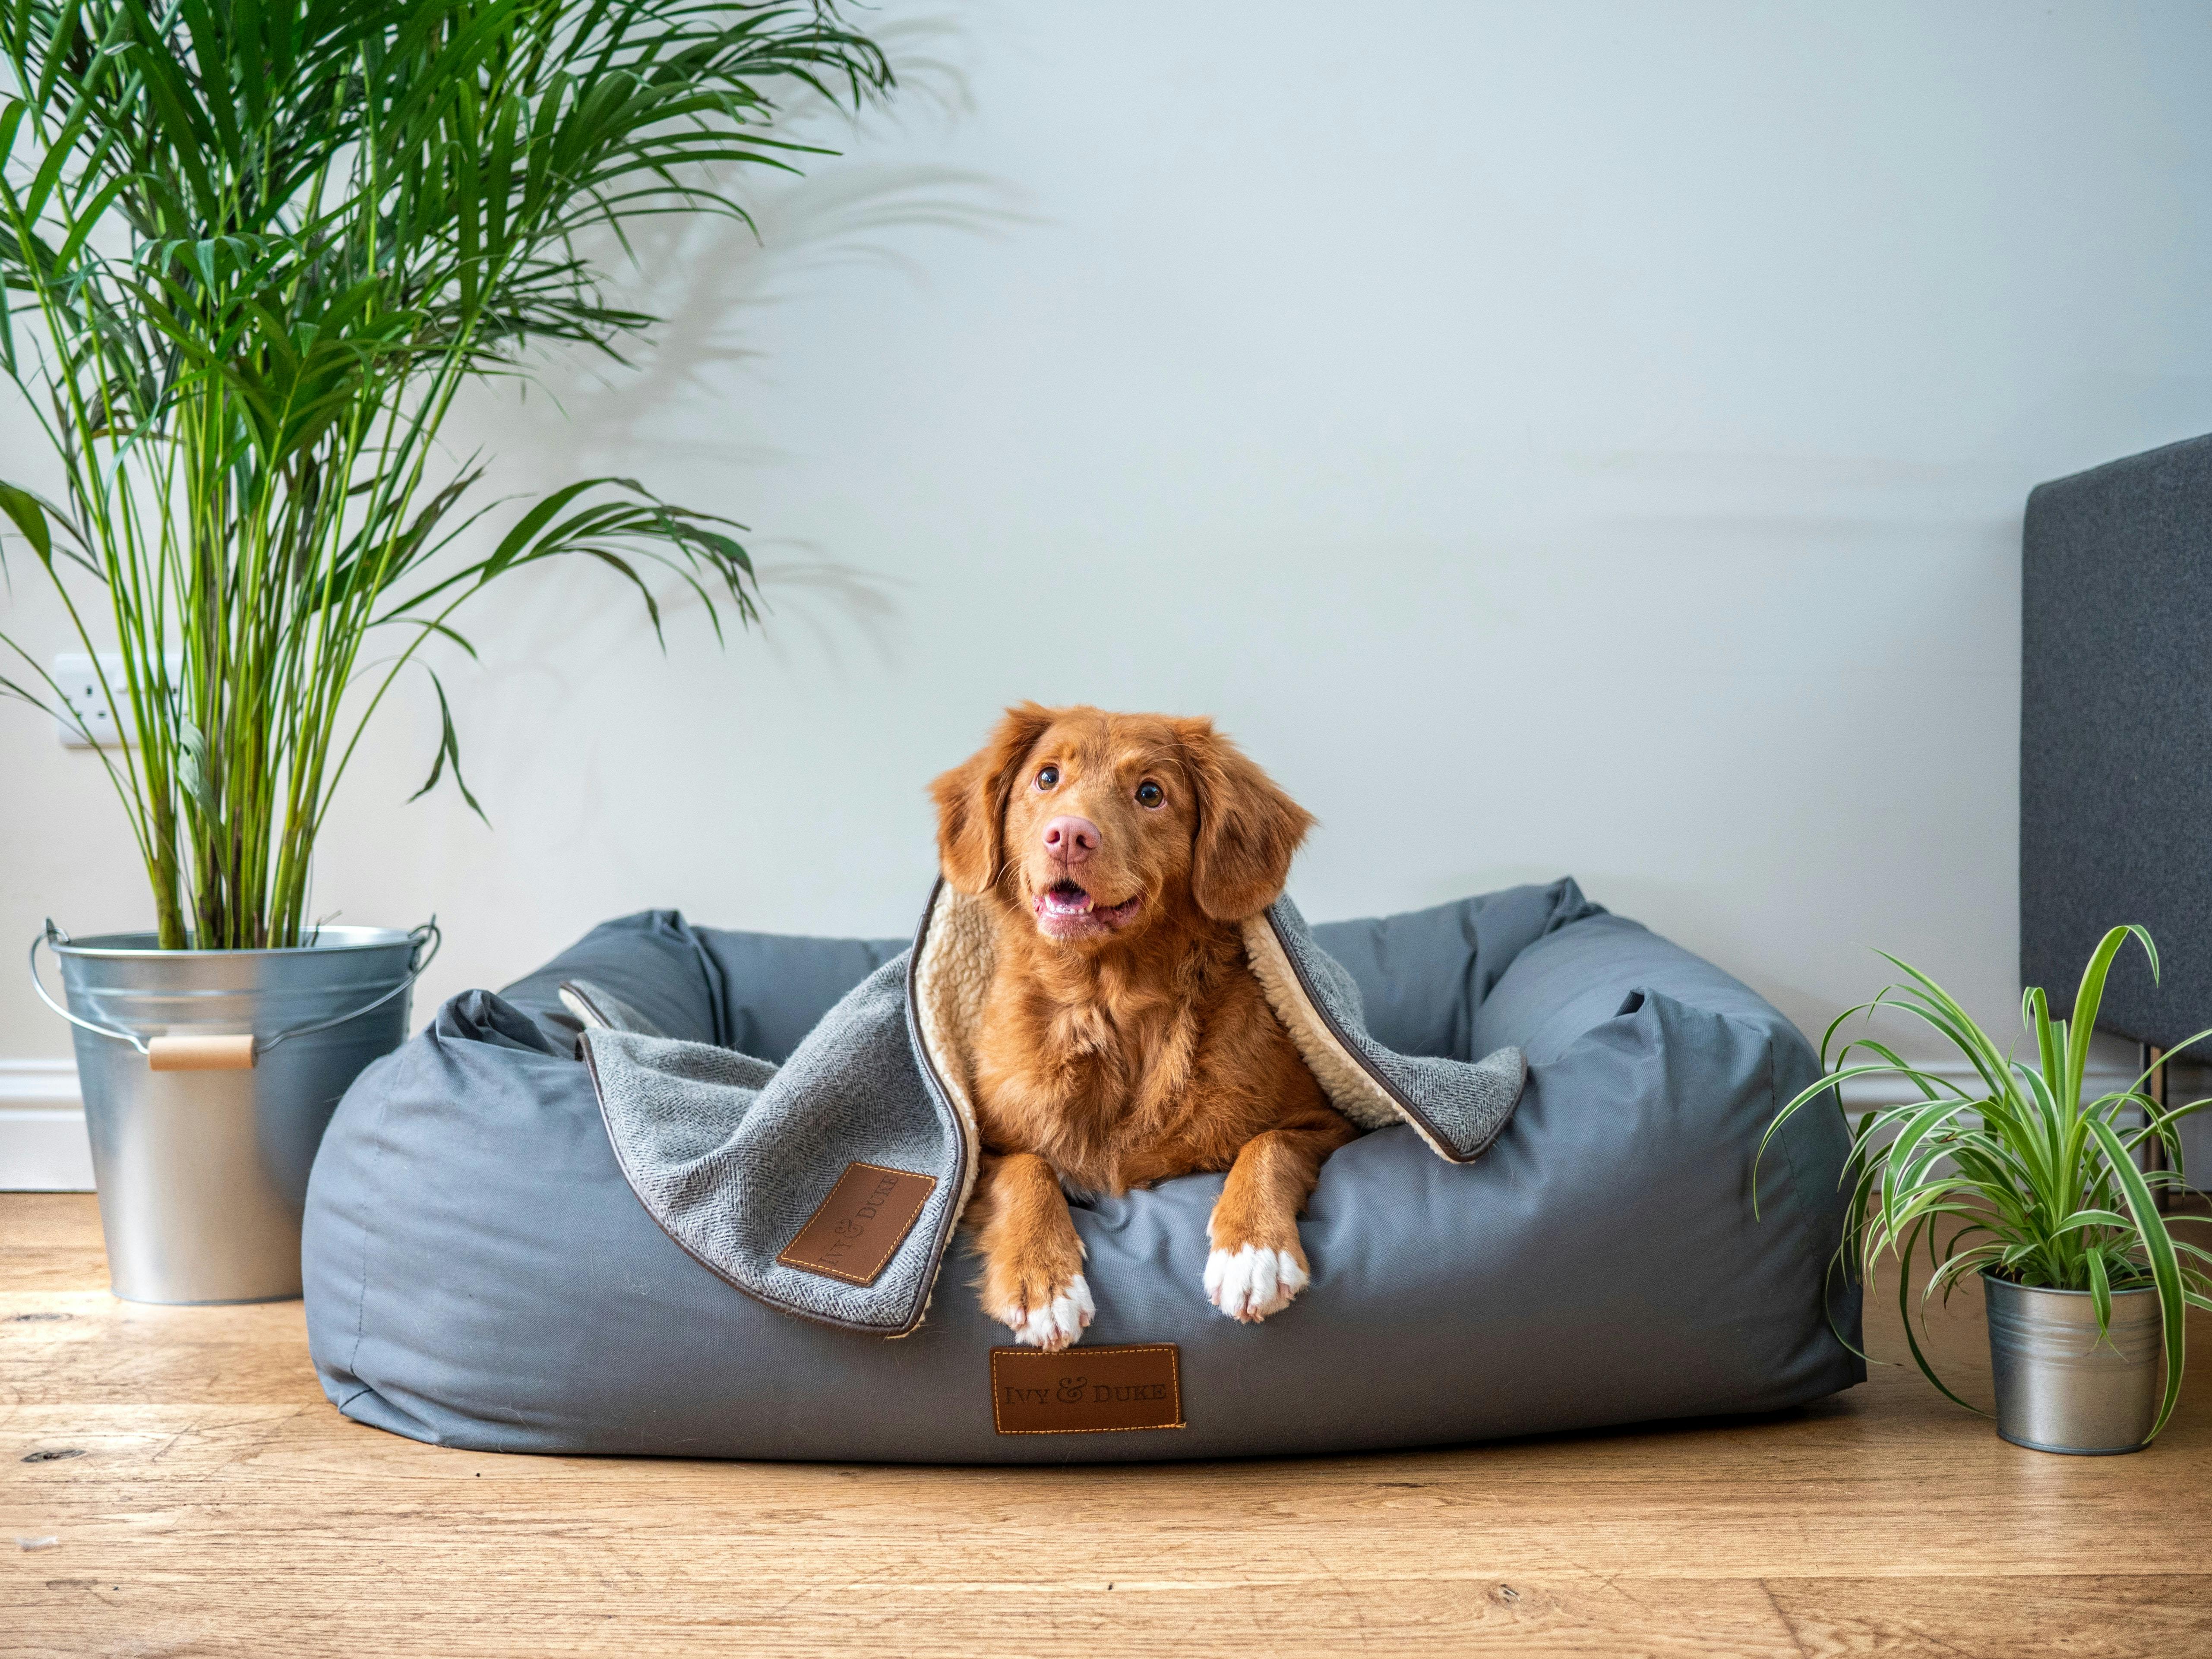 wellness-how-to-help-your-dog-adjust-to-their-new-home-hero-image